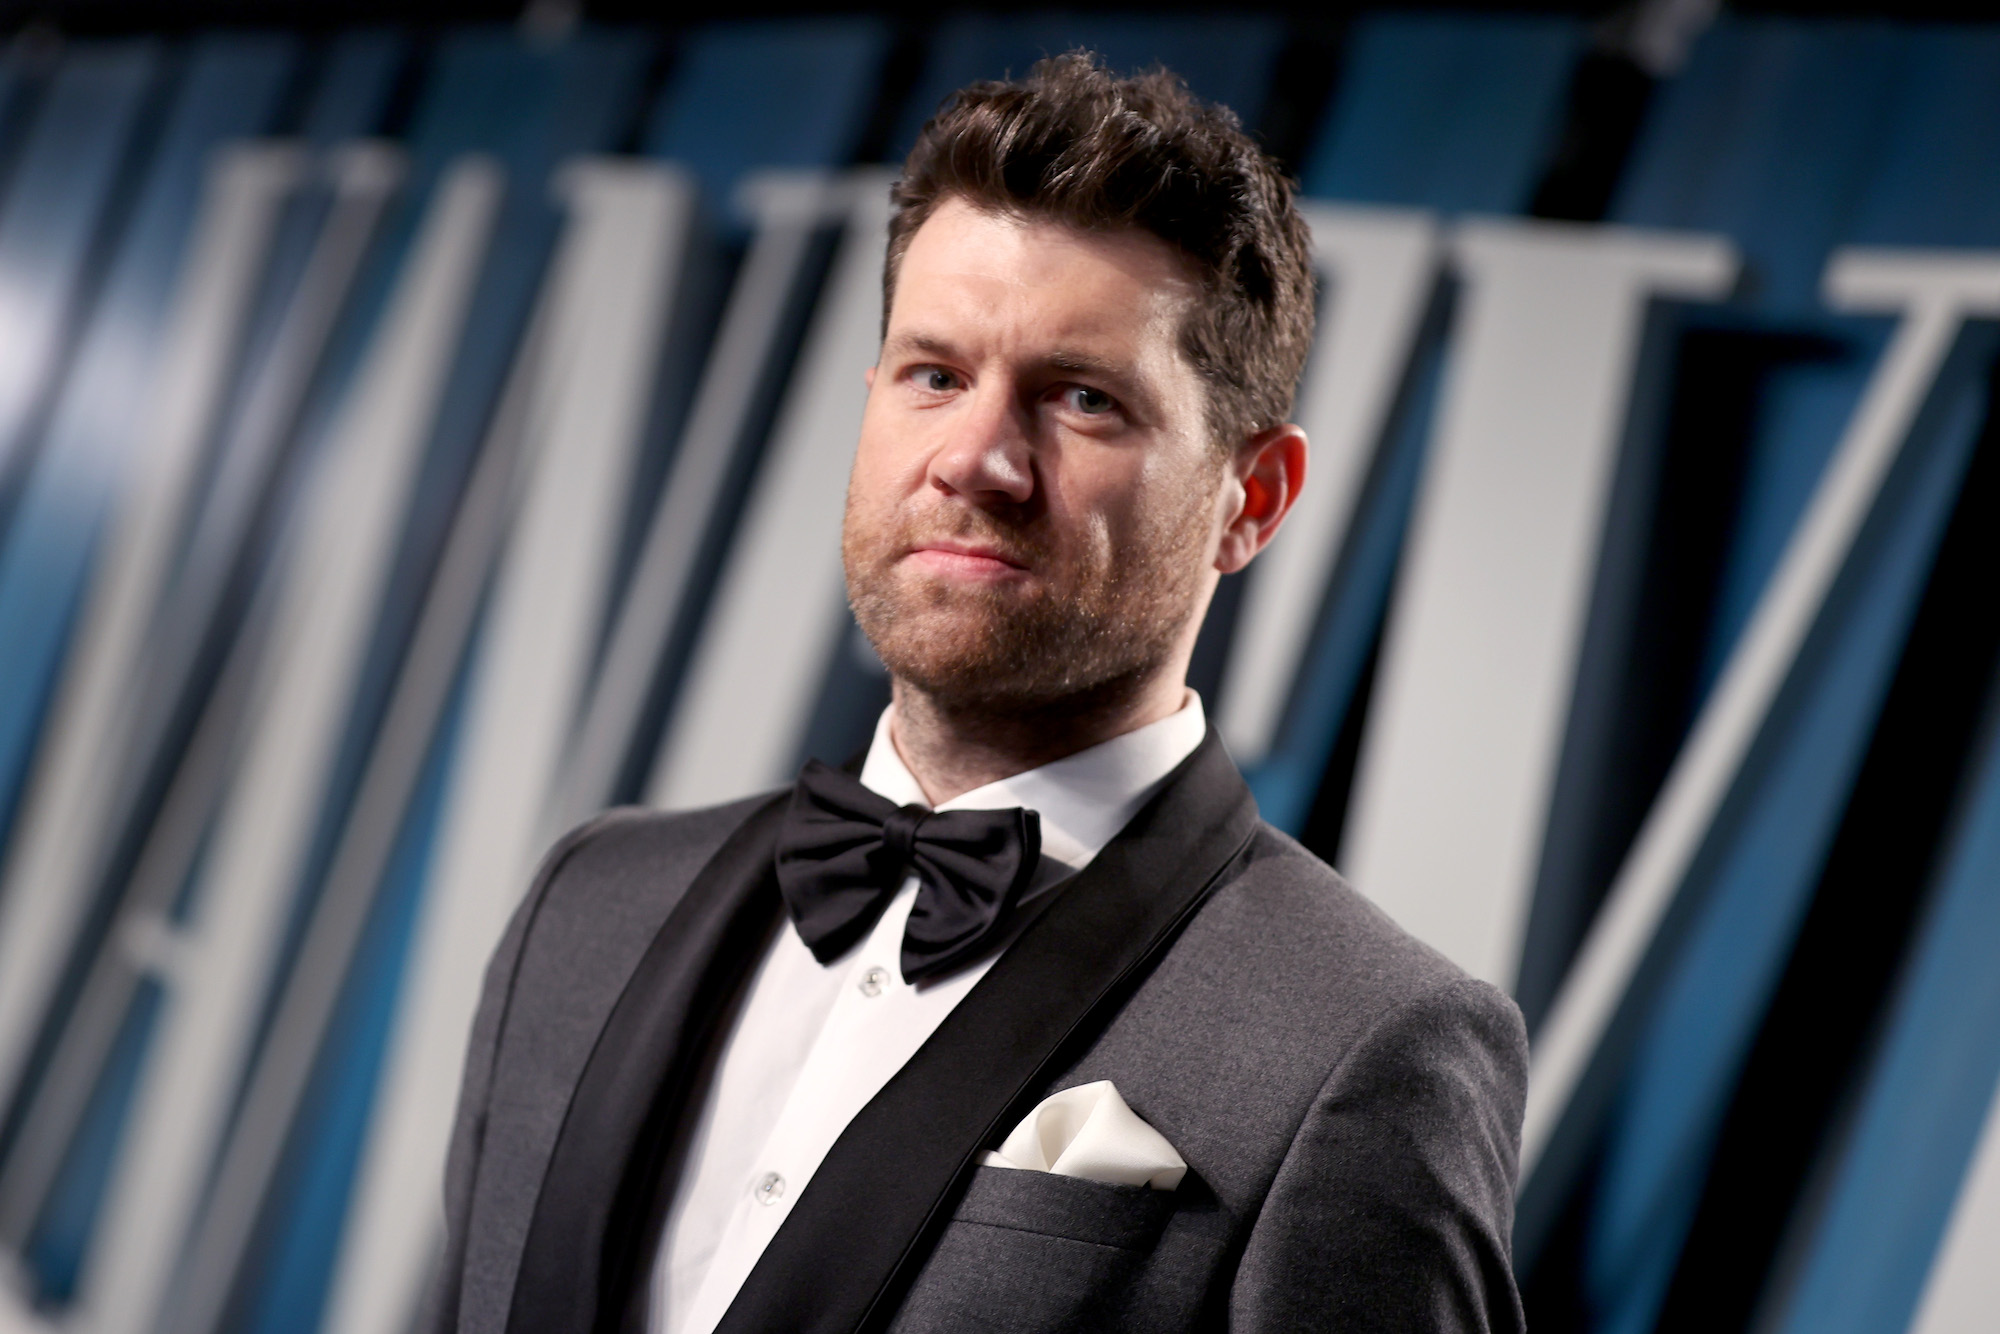 Billy Eichner slightly smiling in front of a blurred background